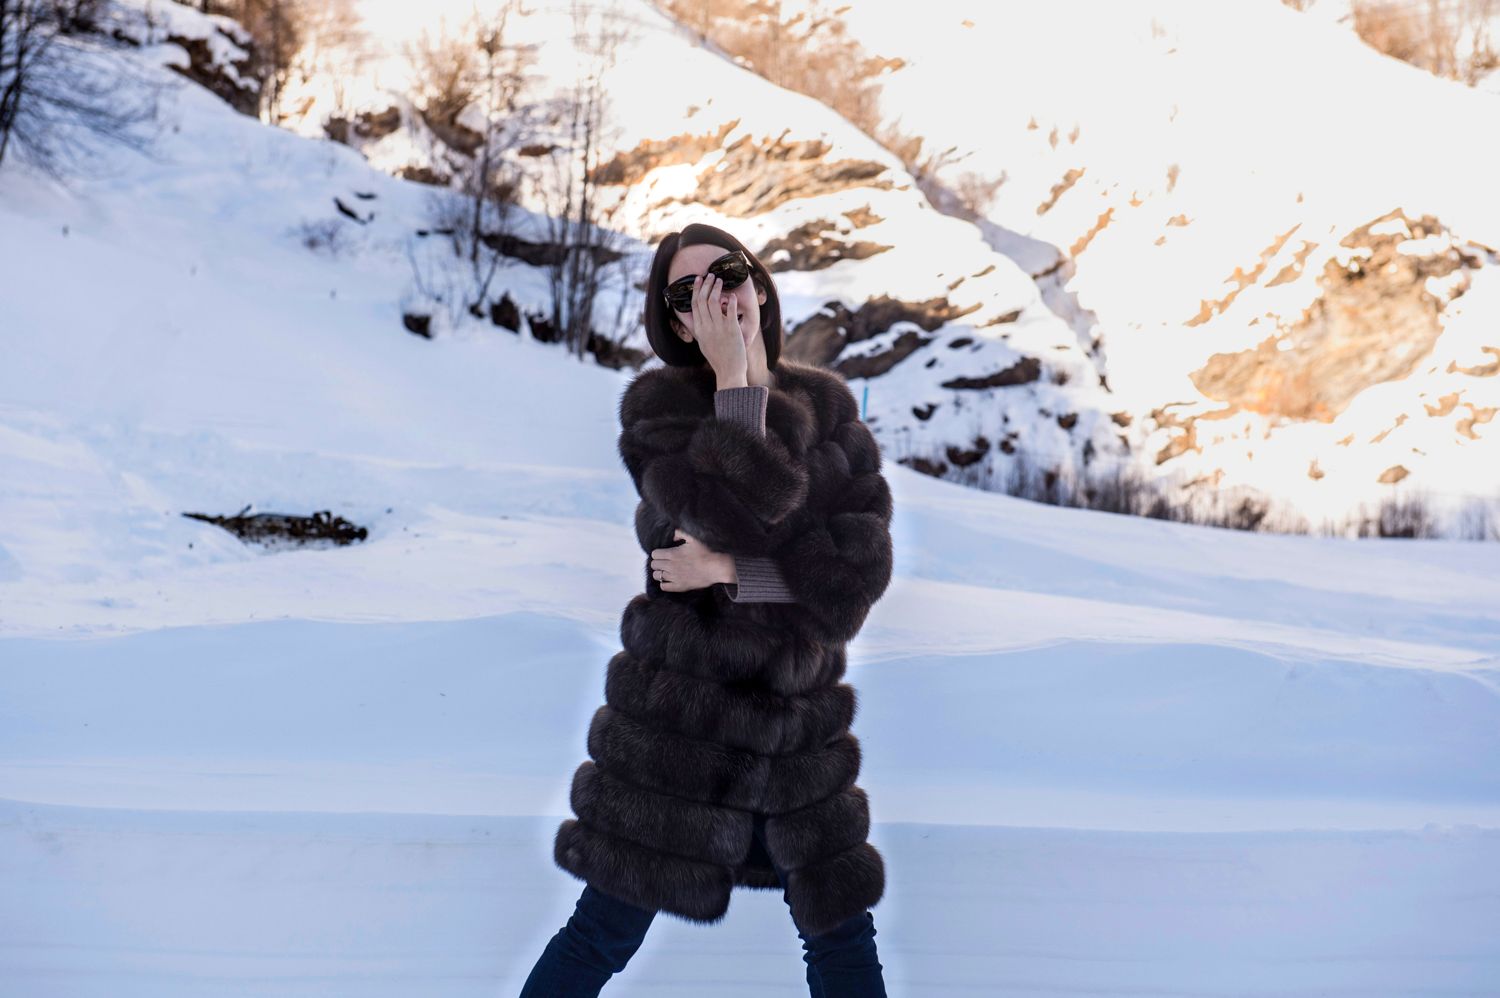 christina ghilemetti sable fur wore by lady fur